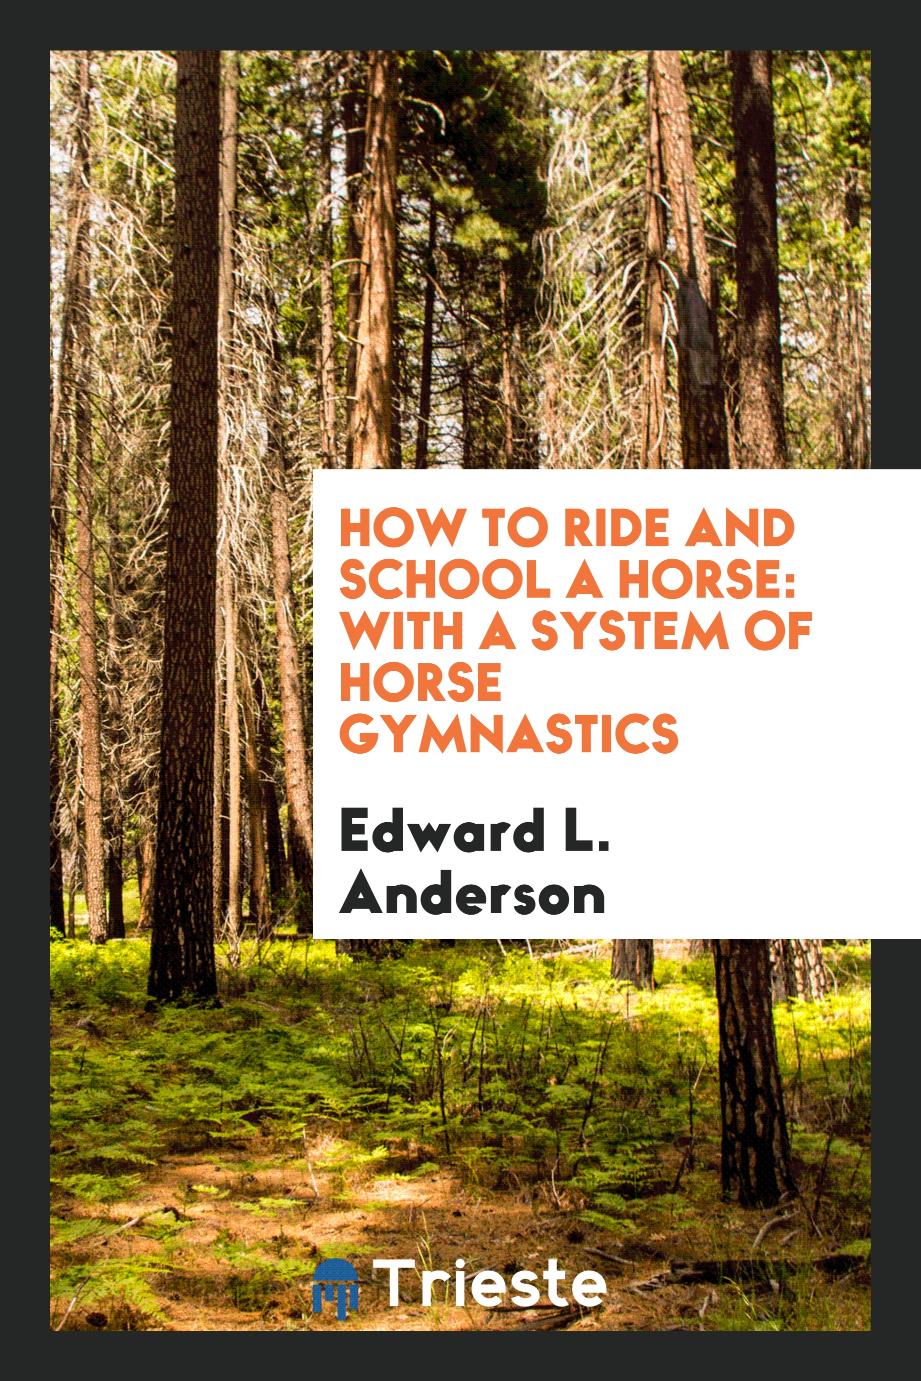 How to Ride and School a Horse: With a System of Horse Gymnastics